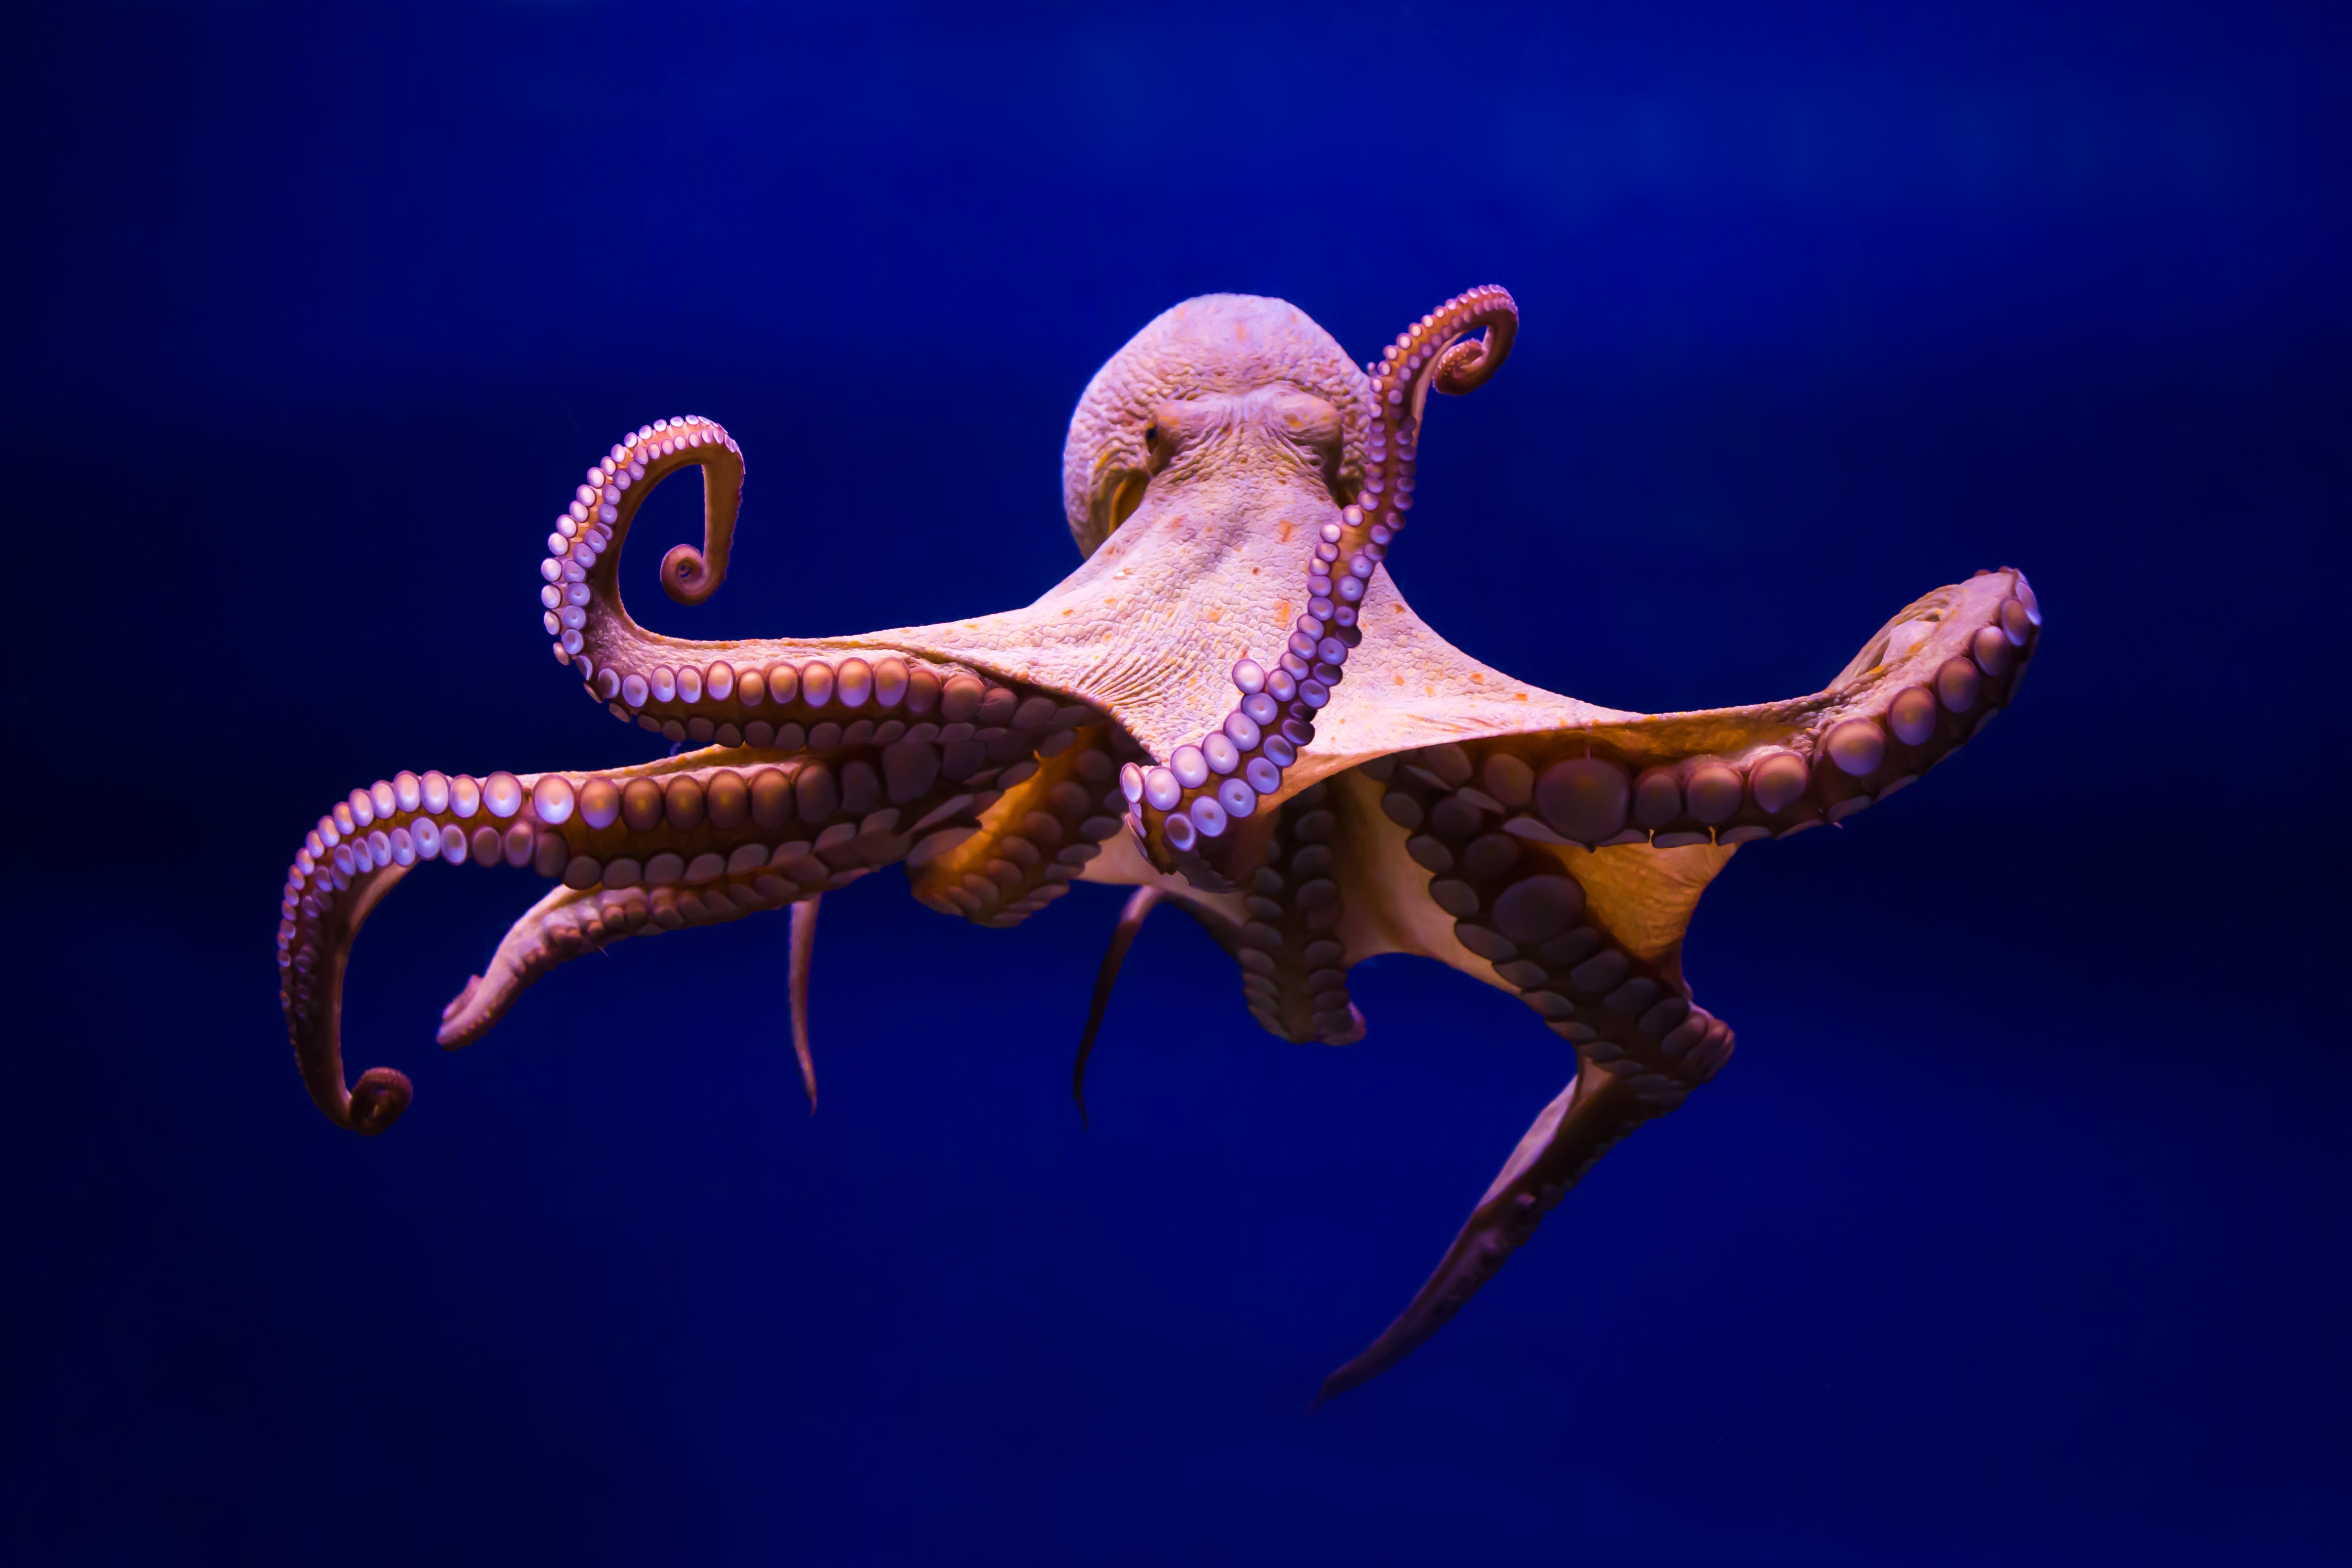 The ‘animal industrial complex’ raises numerous ethical questions, especially with regards to sentient creatures like octopuses